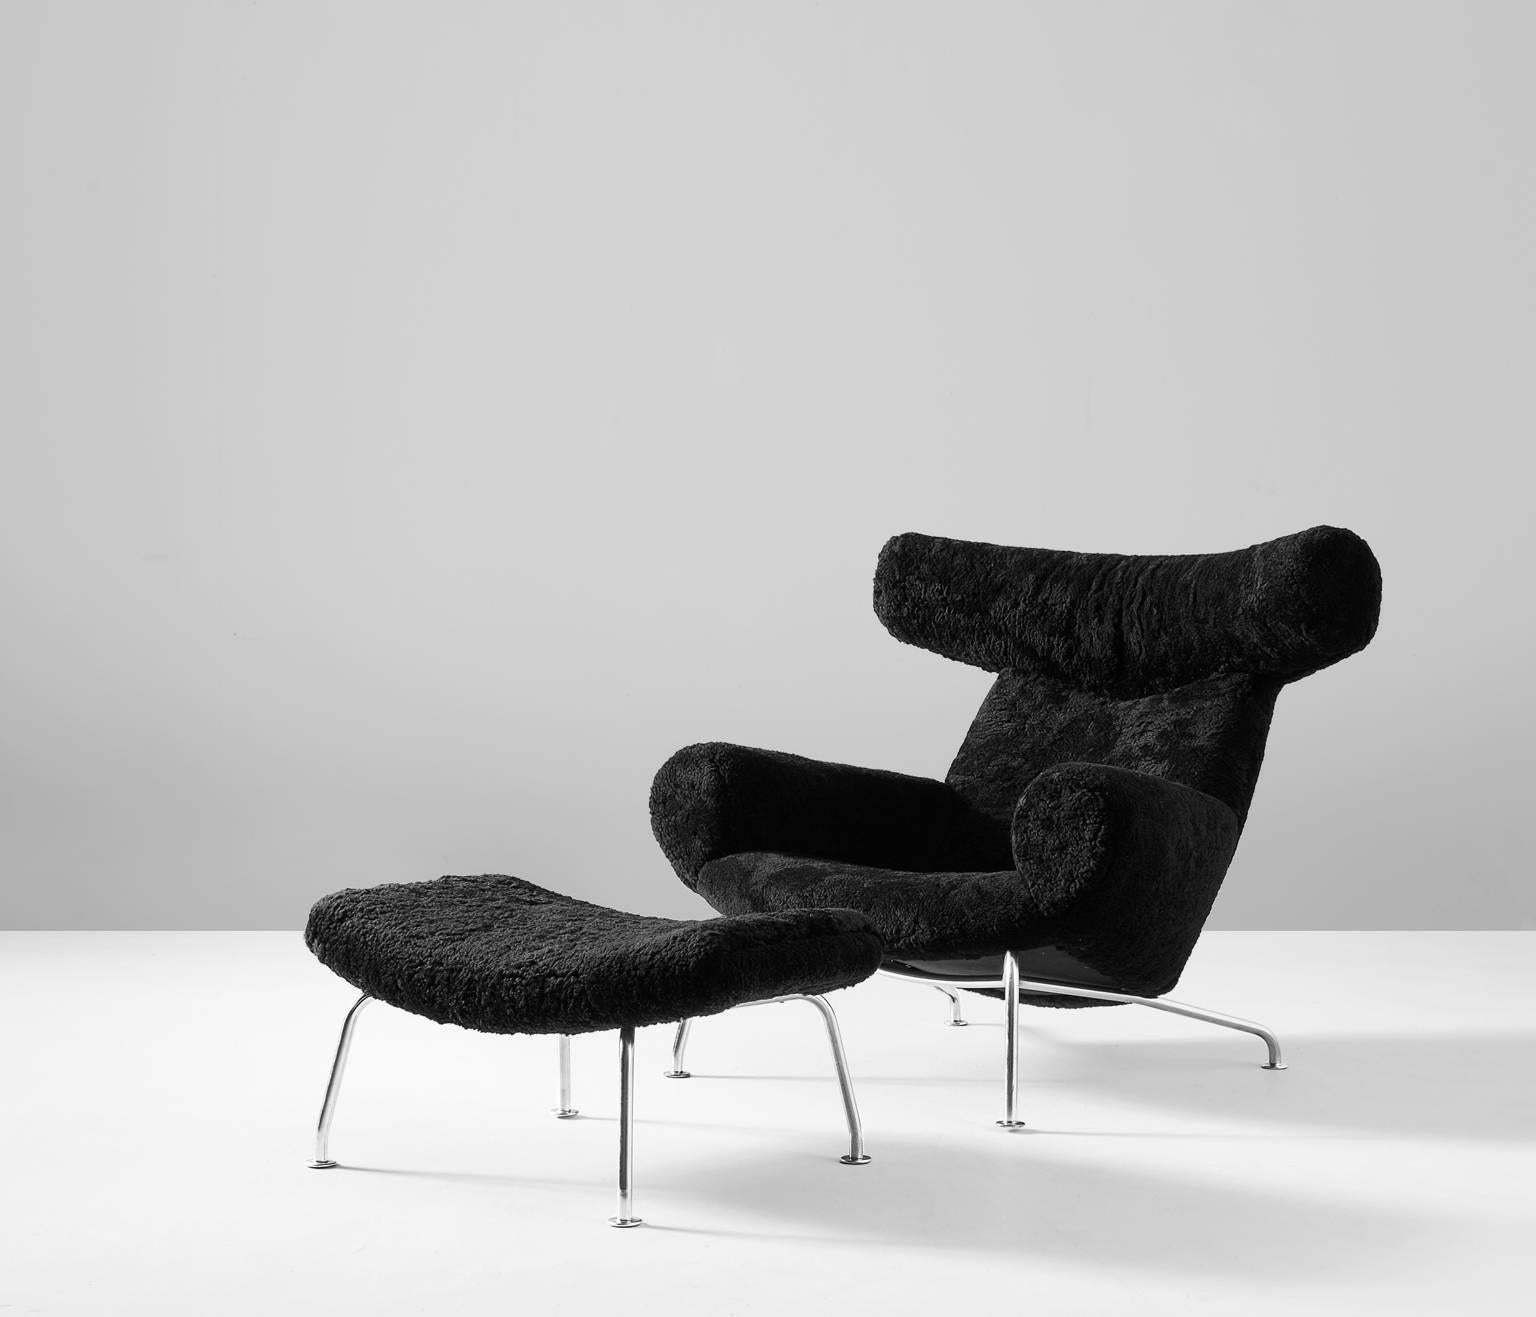 Ox lounge chair and ottoman, steel and fabric, by Hans Wegner for A.P. Stolen, Denmark 1960s.

Early edition of the Ox chair, manufactured by A.P. Stolen. In production at this label until 1962. 

Very comfortable lounge chair by Hans Wegner.